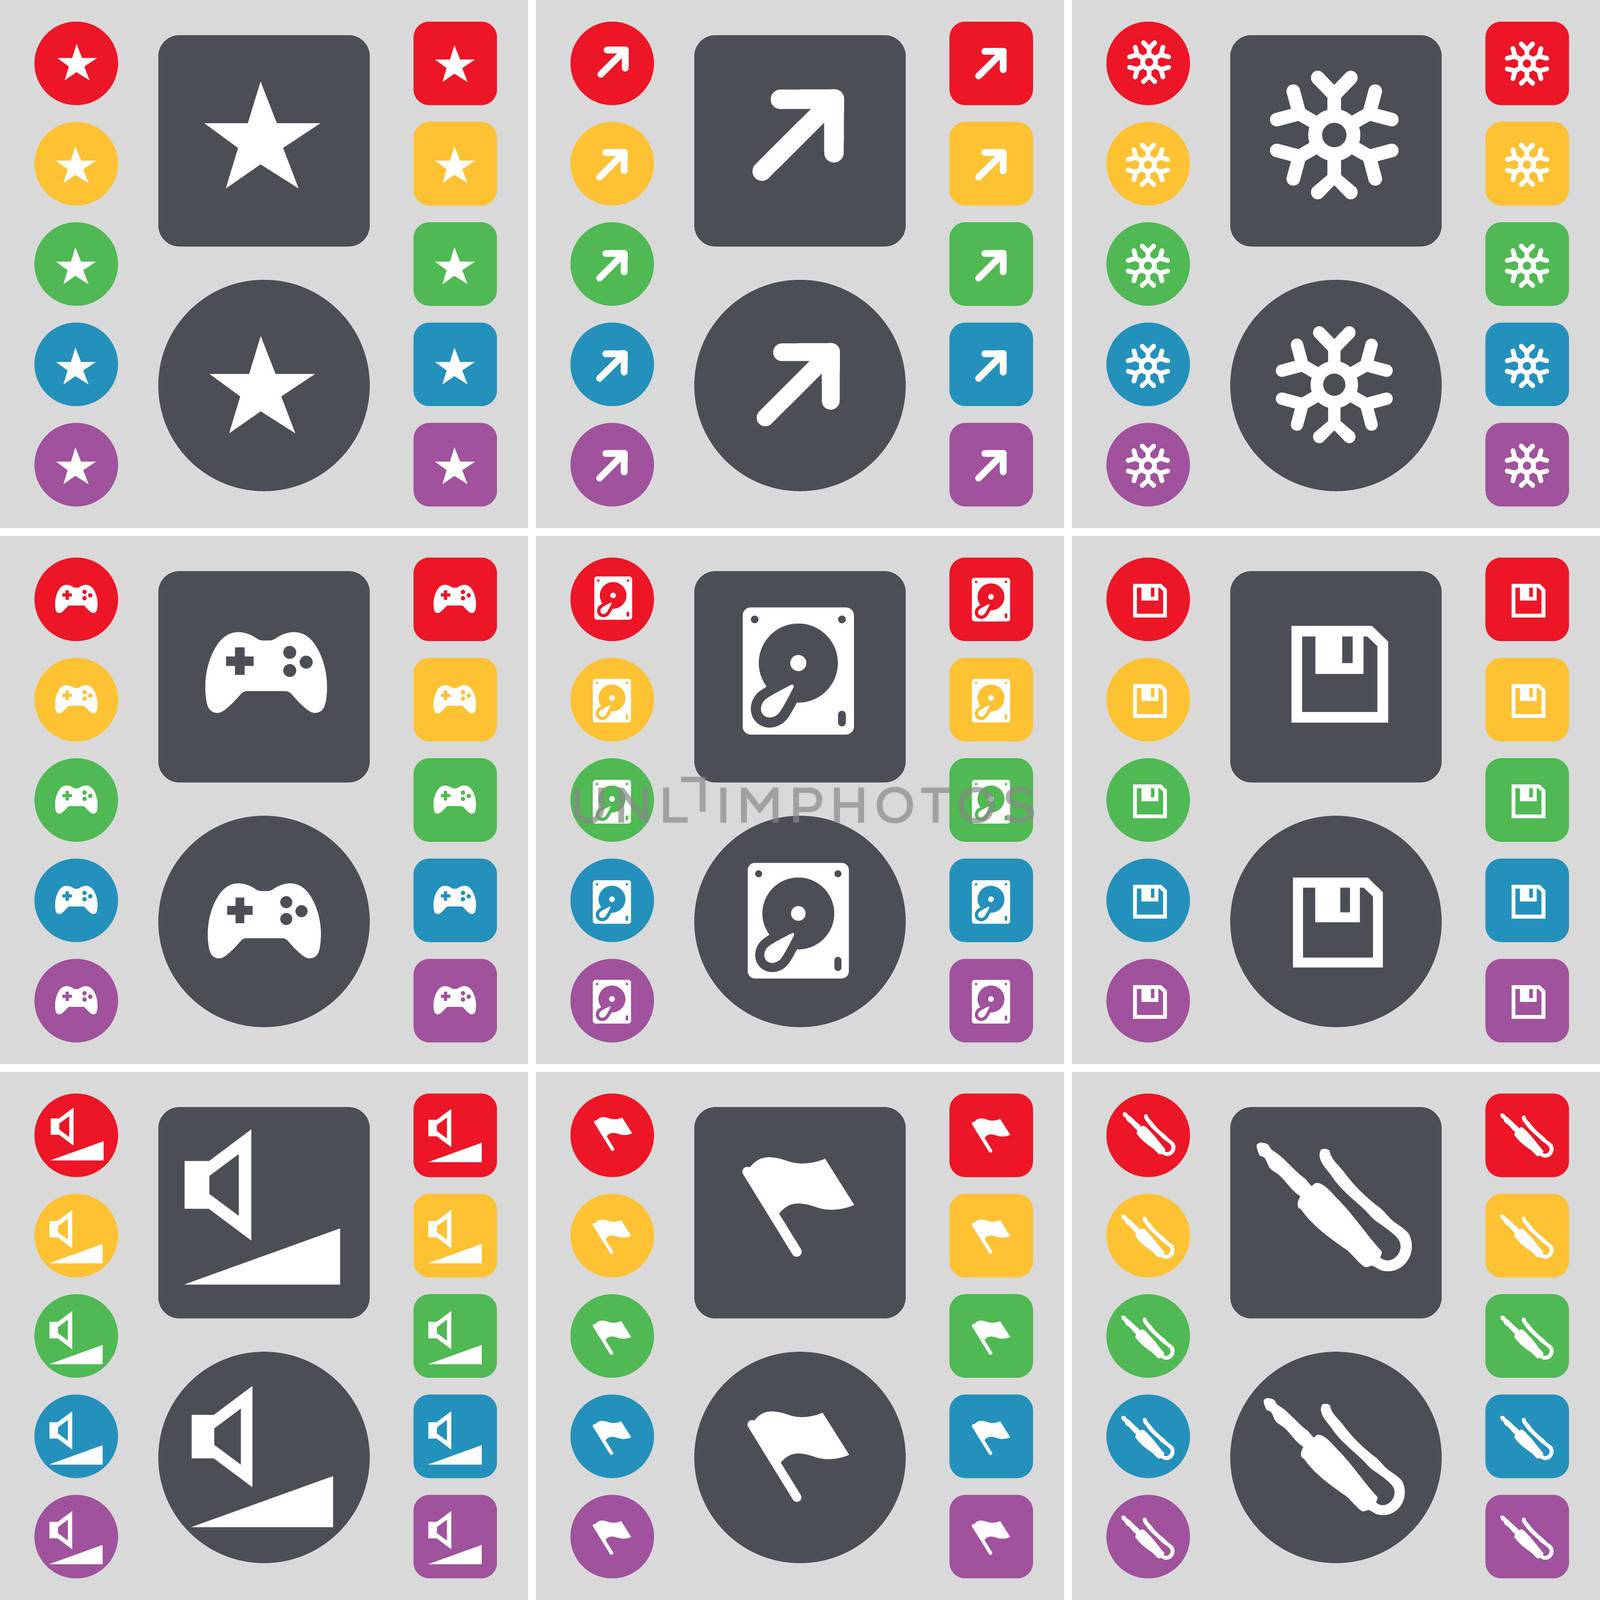 Star, Full screen, Snowflake, Gamepad, Hard drive, Floppy, Volume, Flag, Microphone connector icon symbol. A large set of flat, colored buttons for your design. illustration